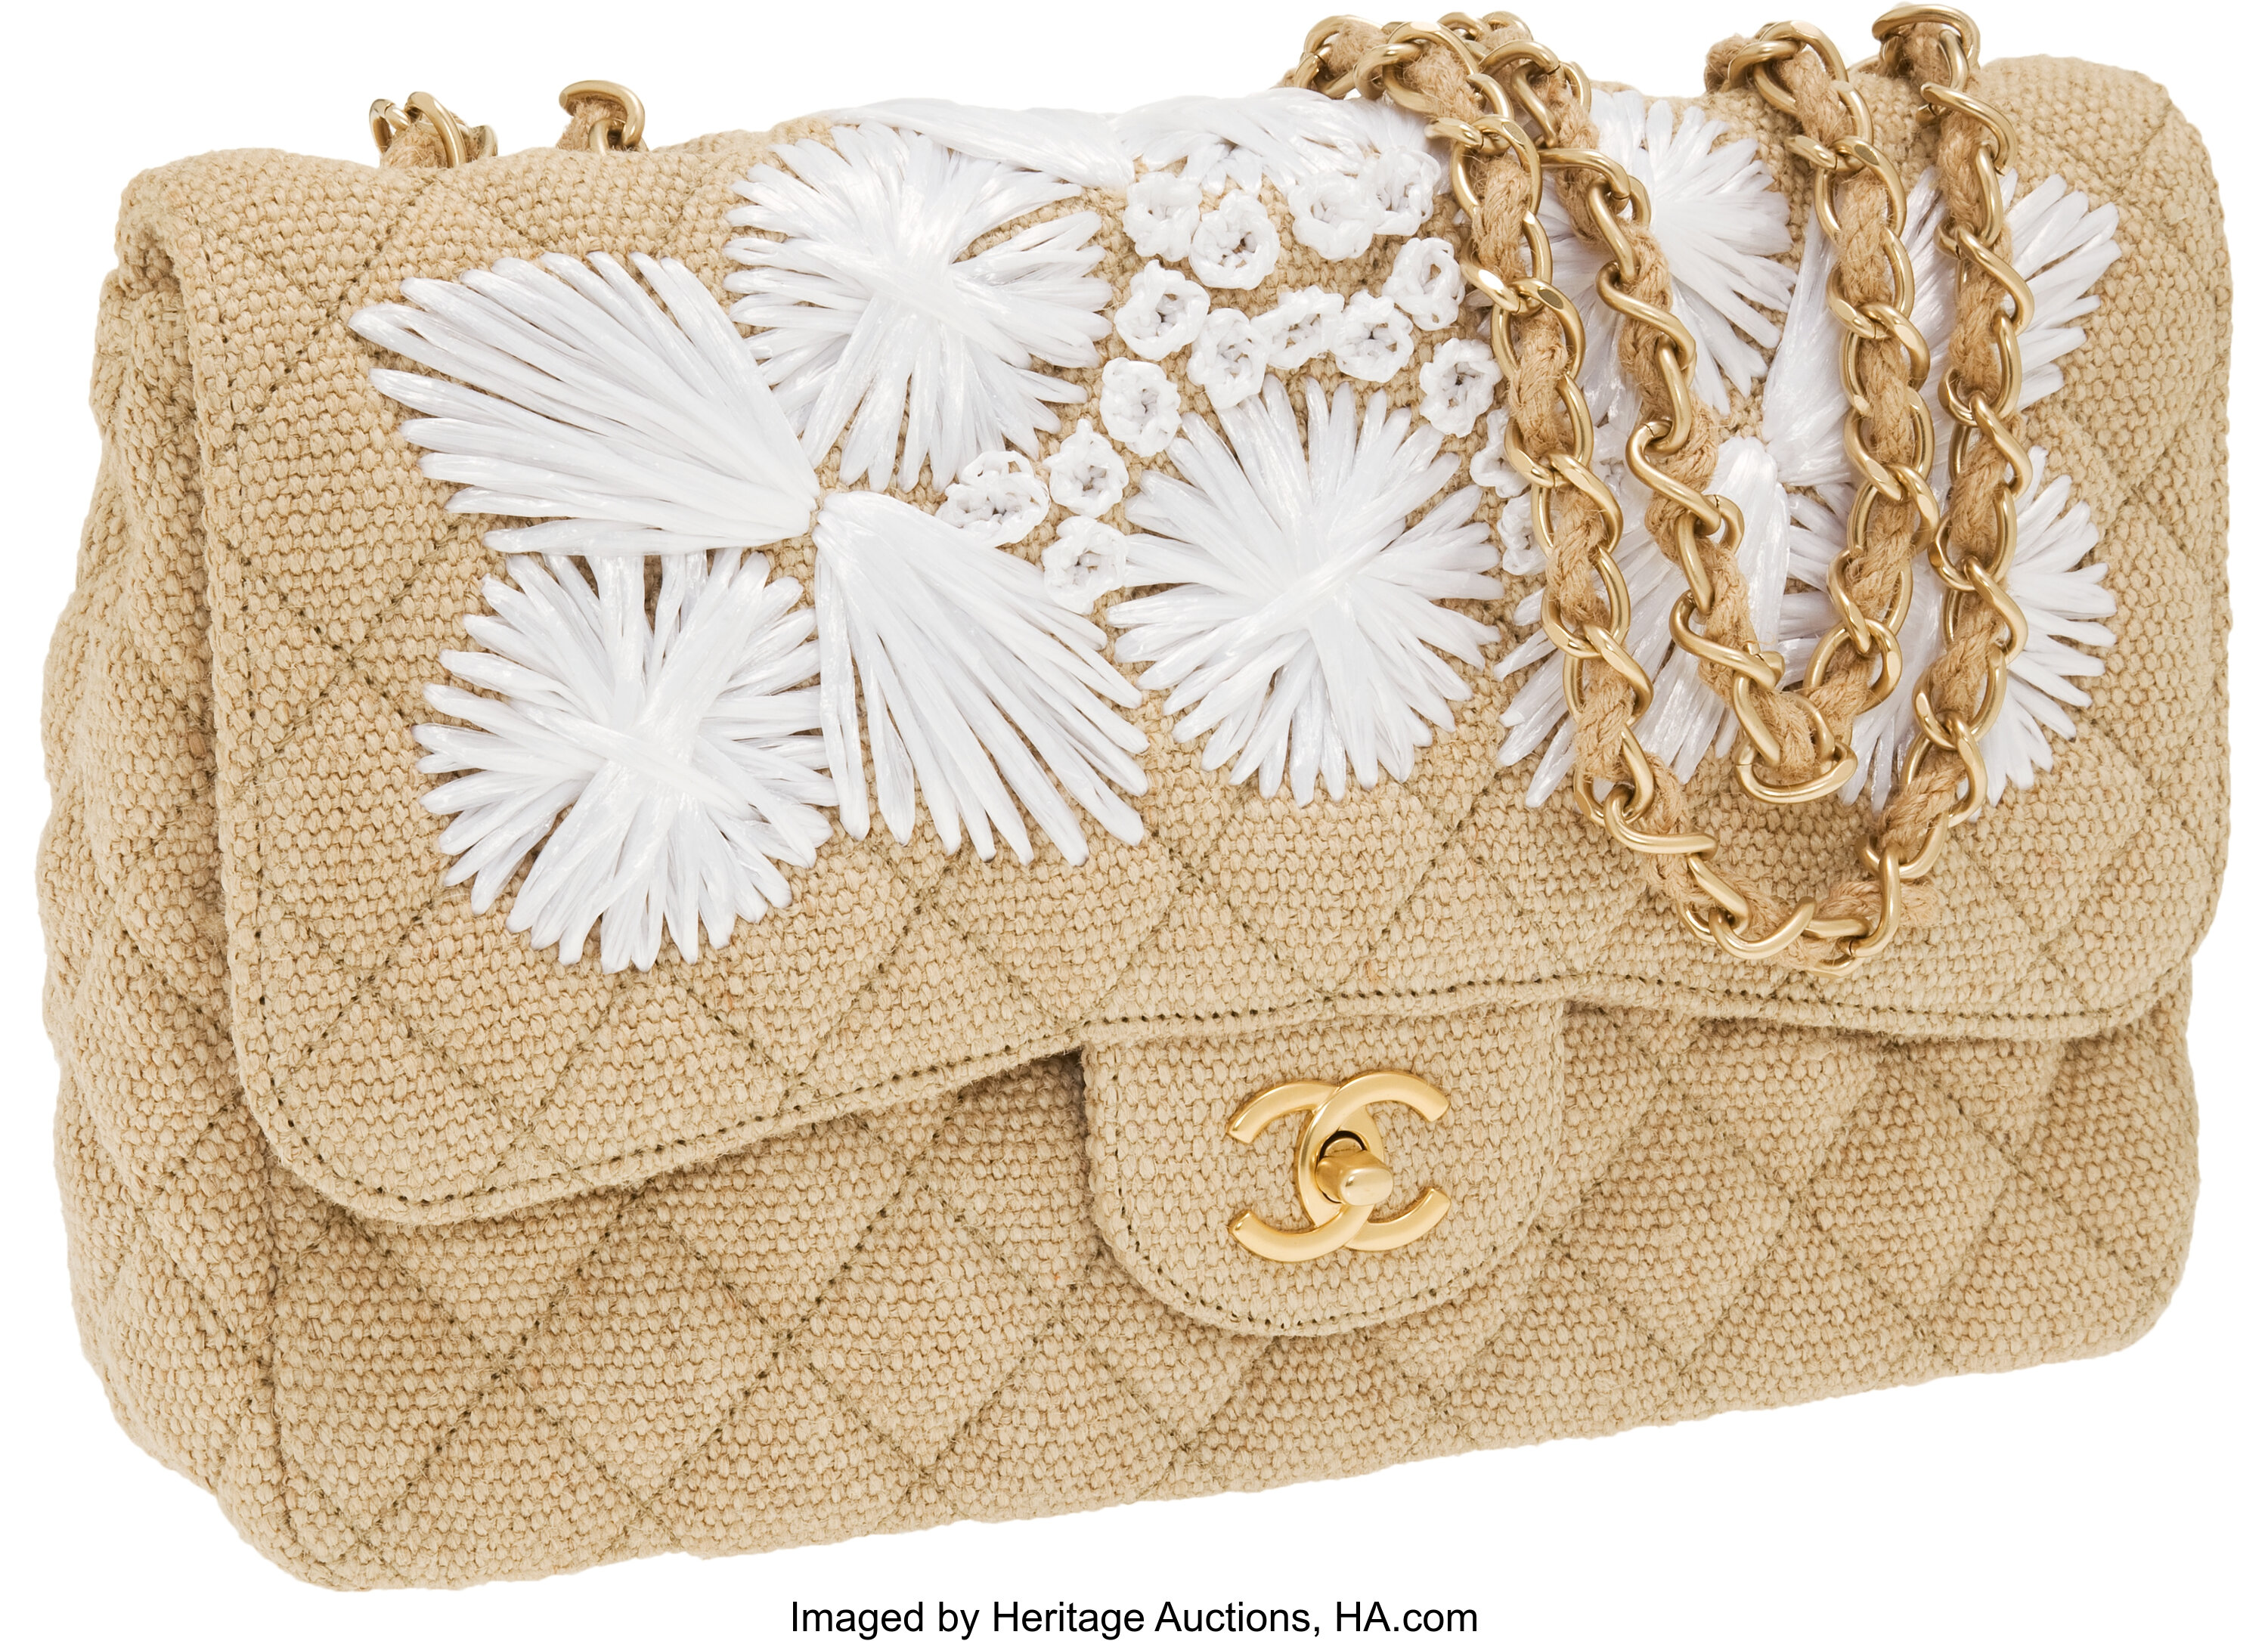 Chanel Sand By the Sea Limited Edition Flap with Gold Hardware - ASL1535